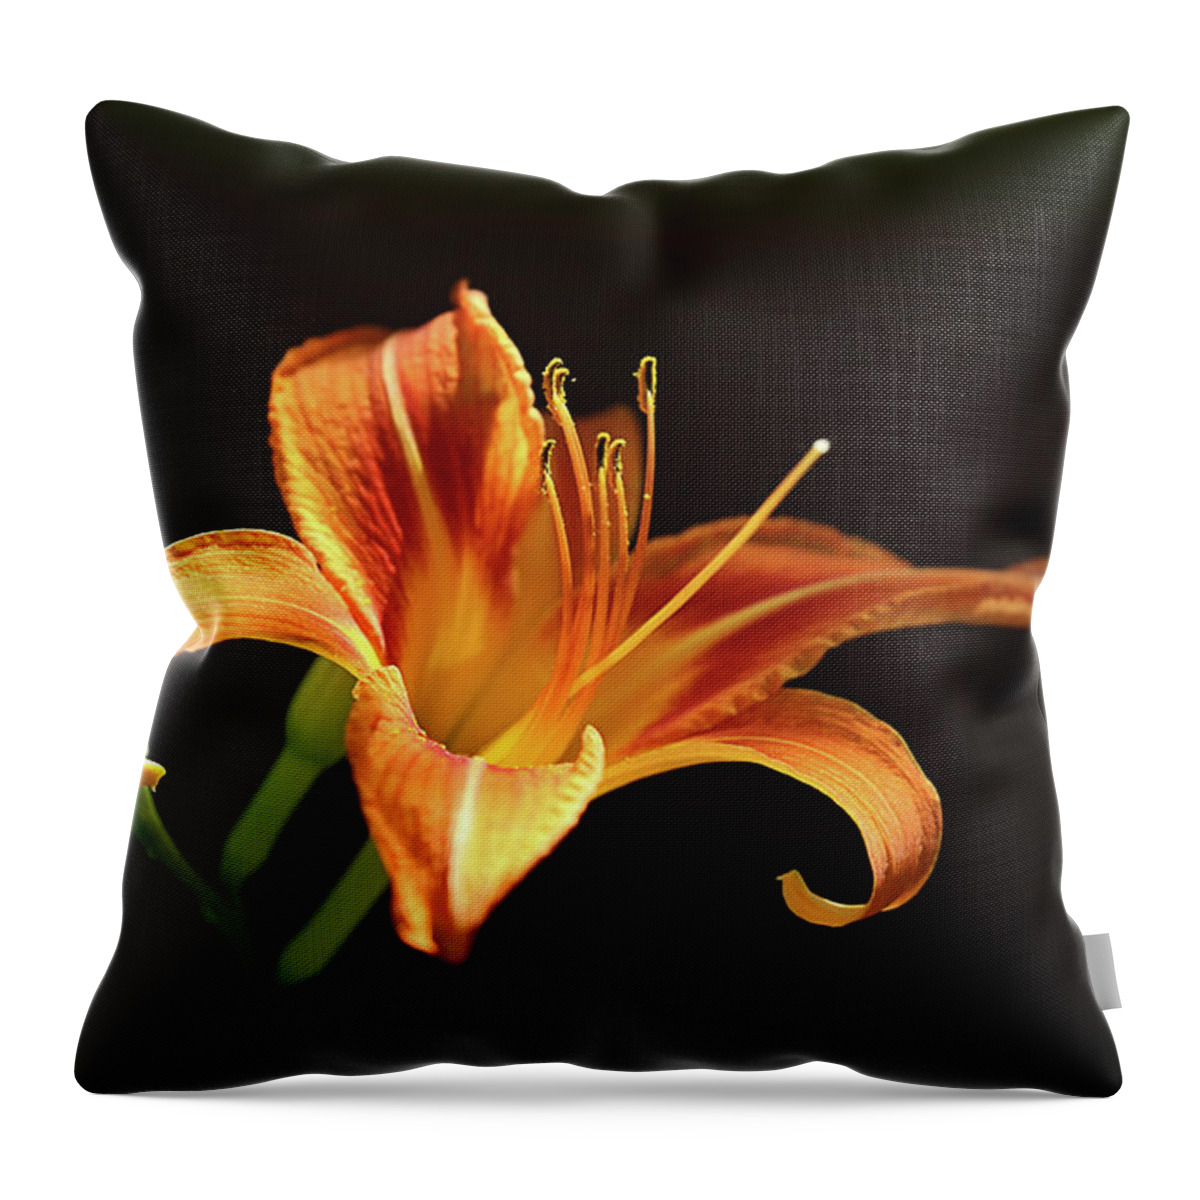 Lilies Throw Pillow featuring the photograph Day Lily by Theresa Campbell